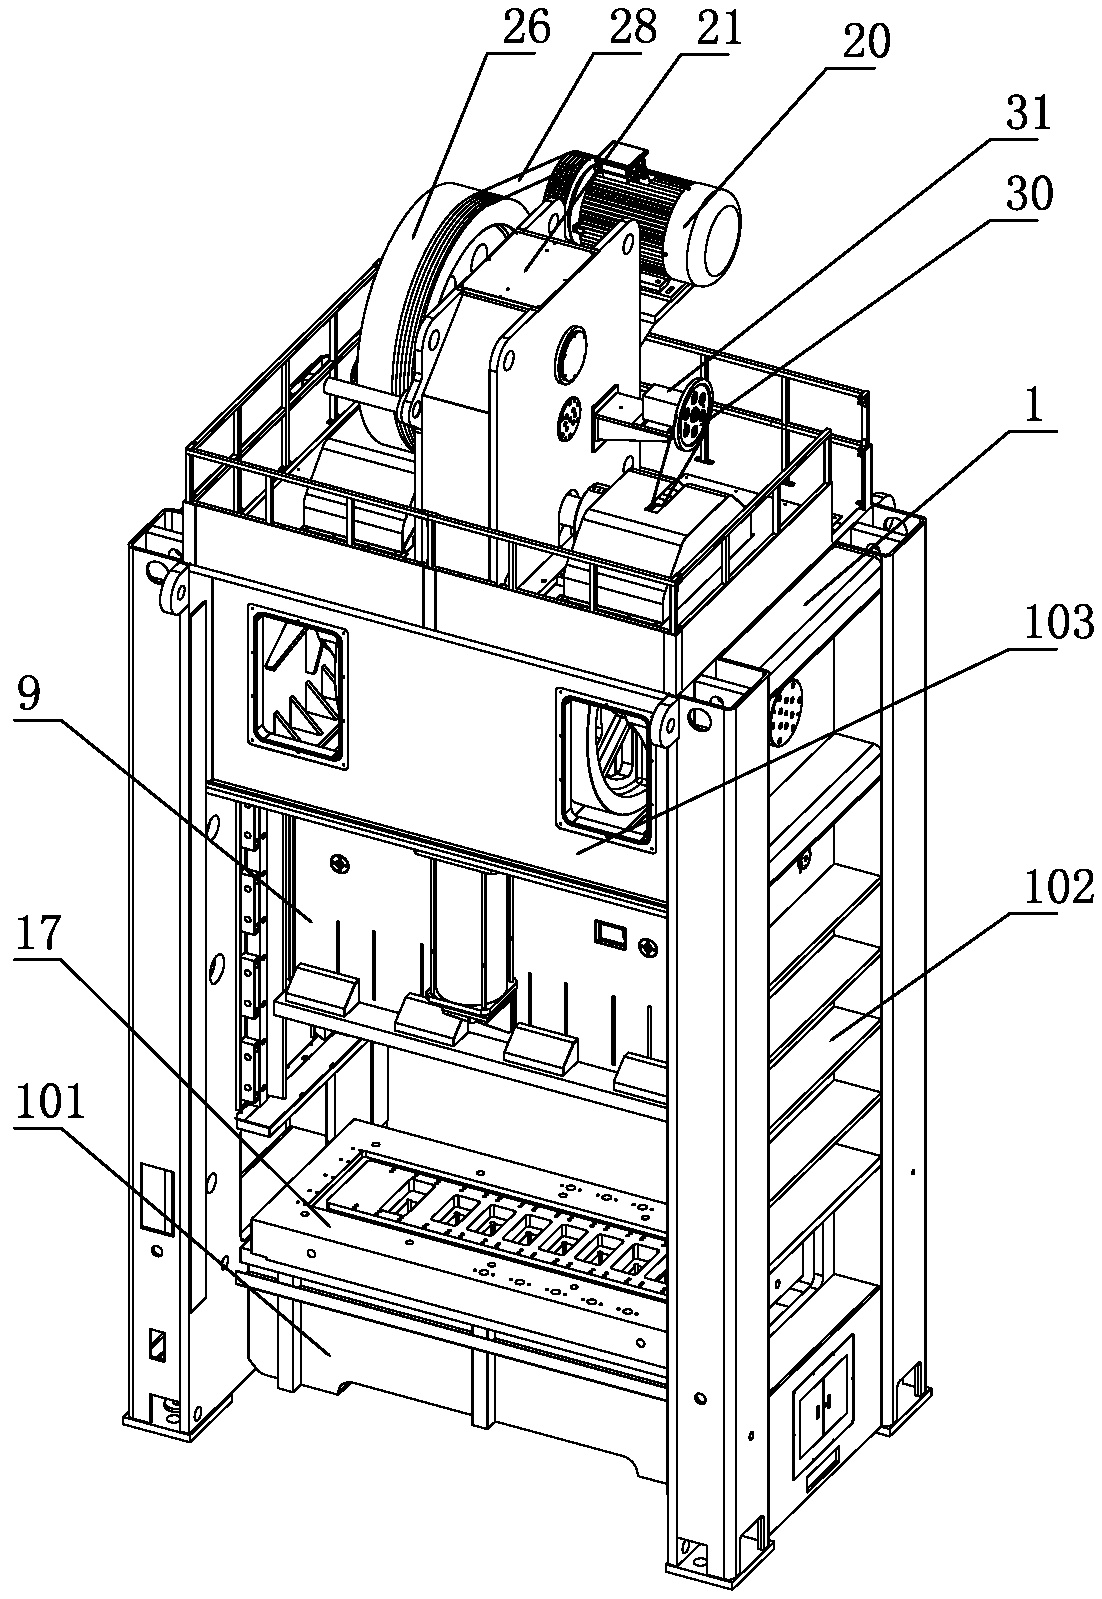 A large-stroke multi-station stretching press